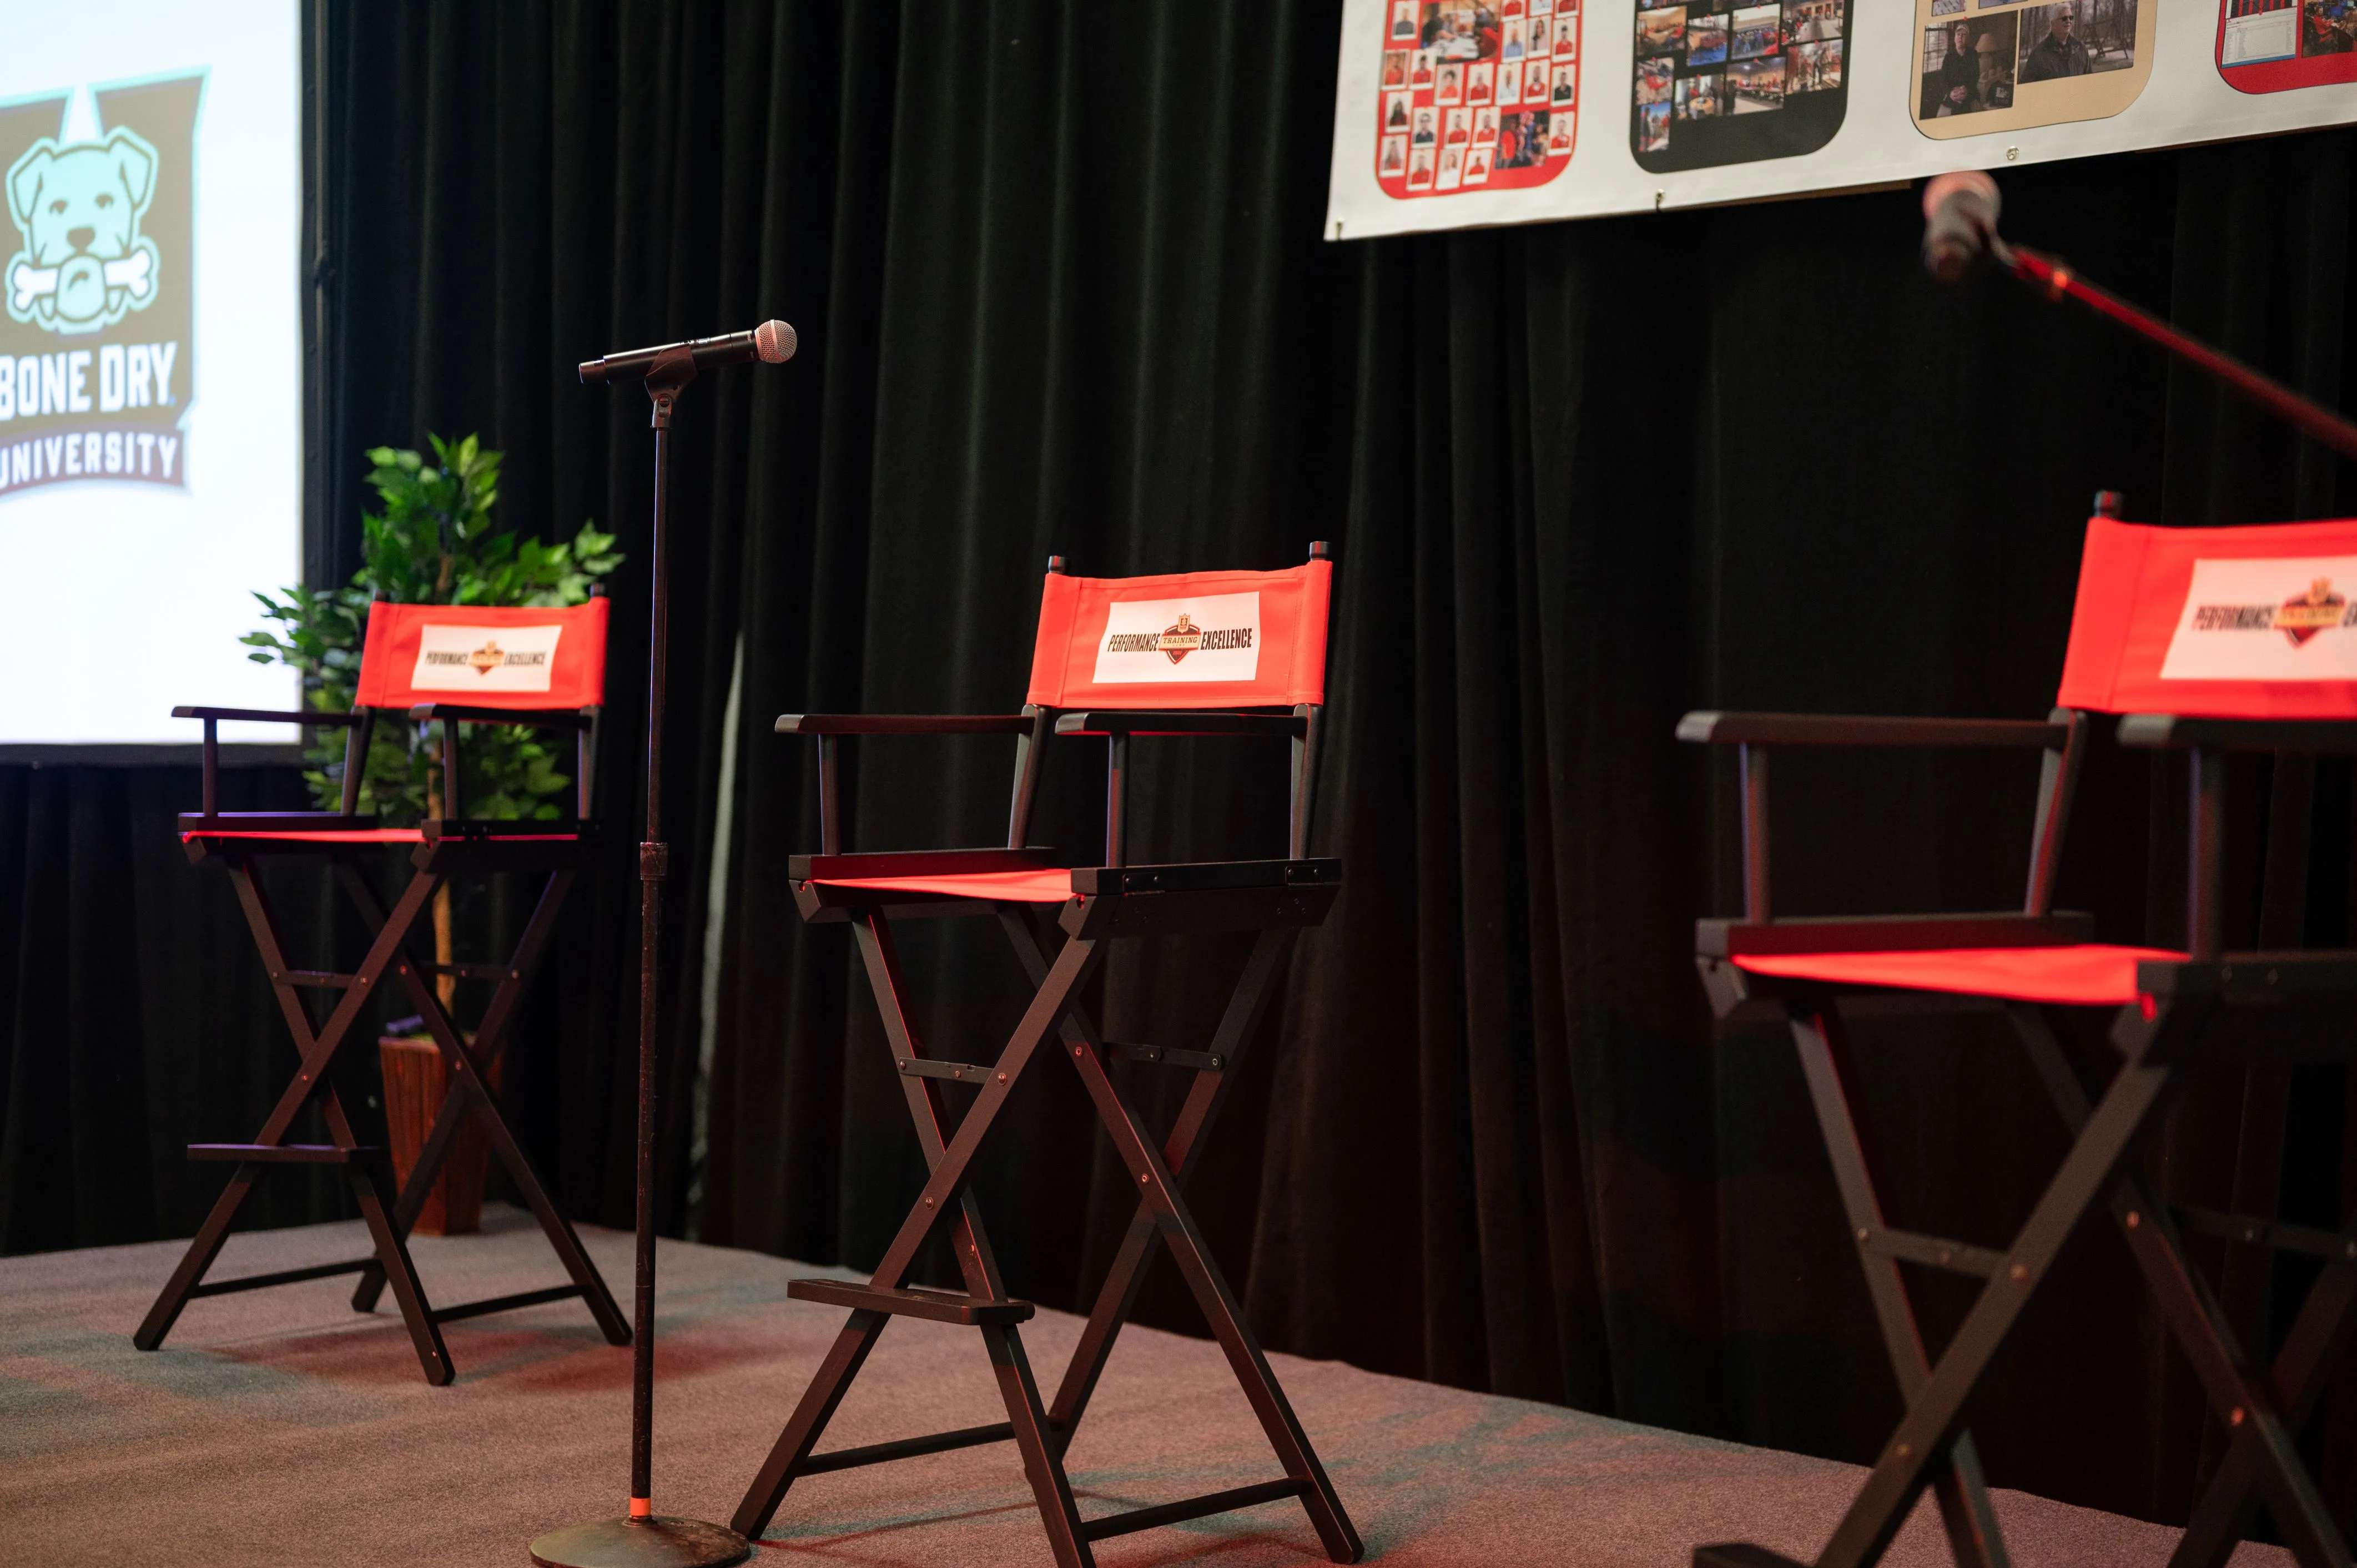  "A stage setup with three empty director's chairs and a microphone, possibly for a panel discussion or interview session."